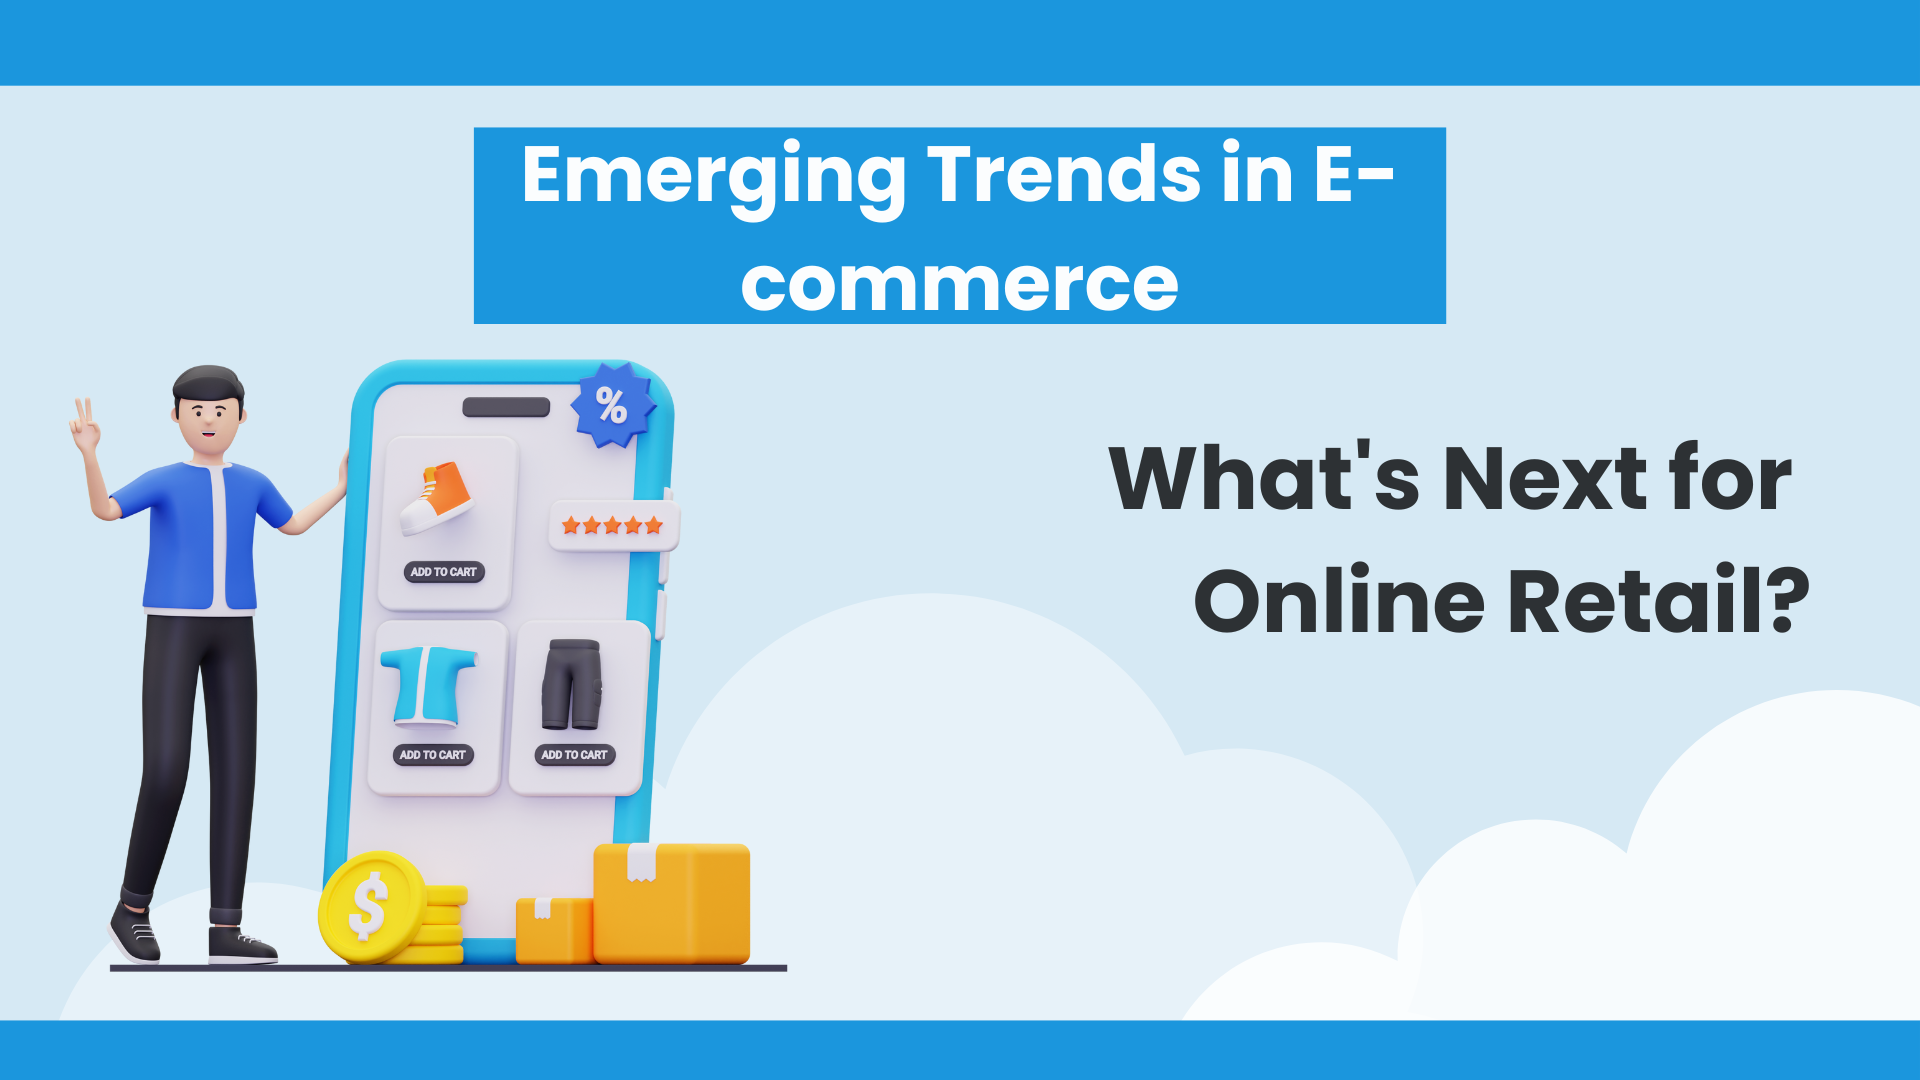 Emerging Trends in E-commerce: What's Next for Online Retail?